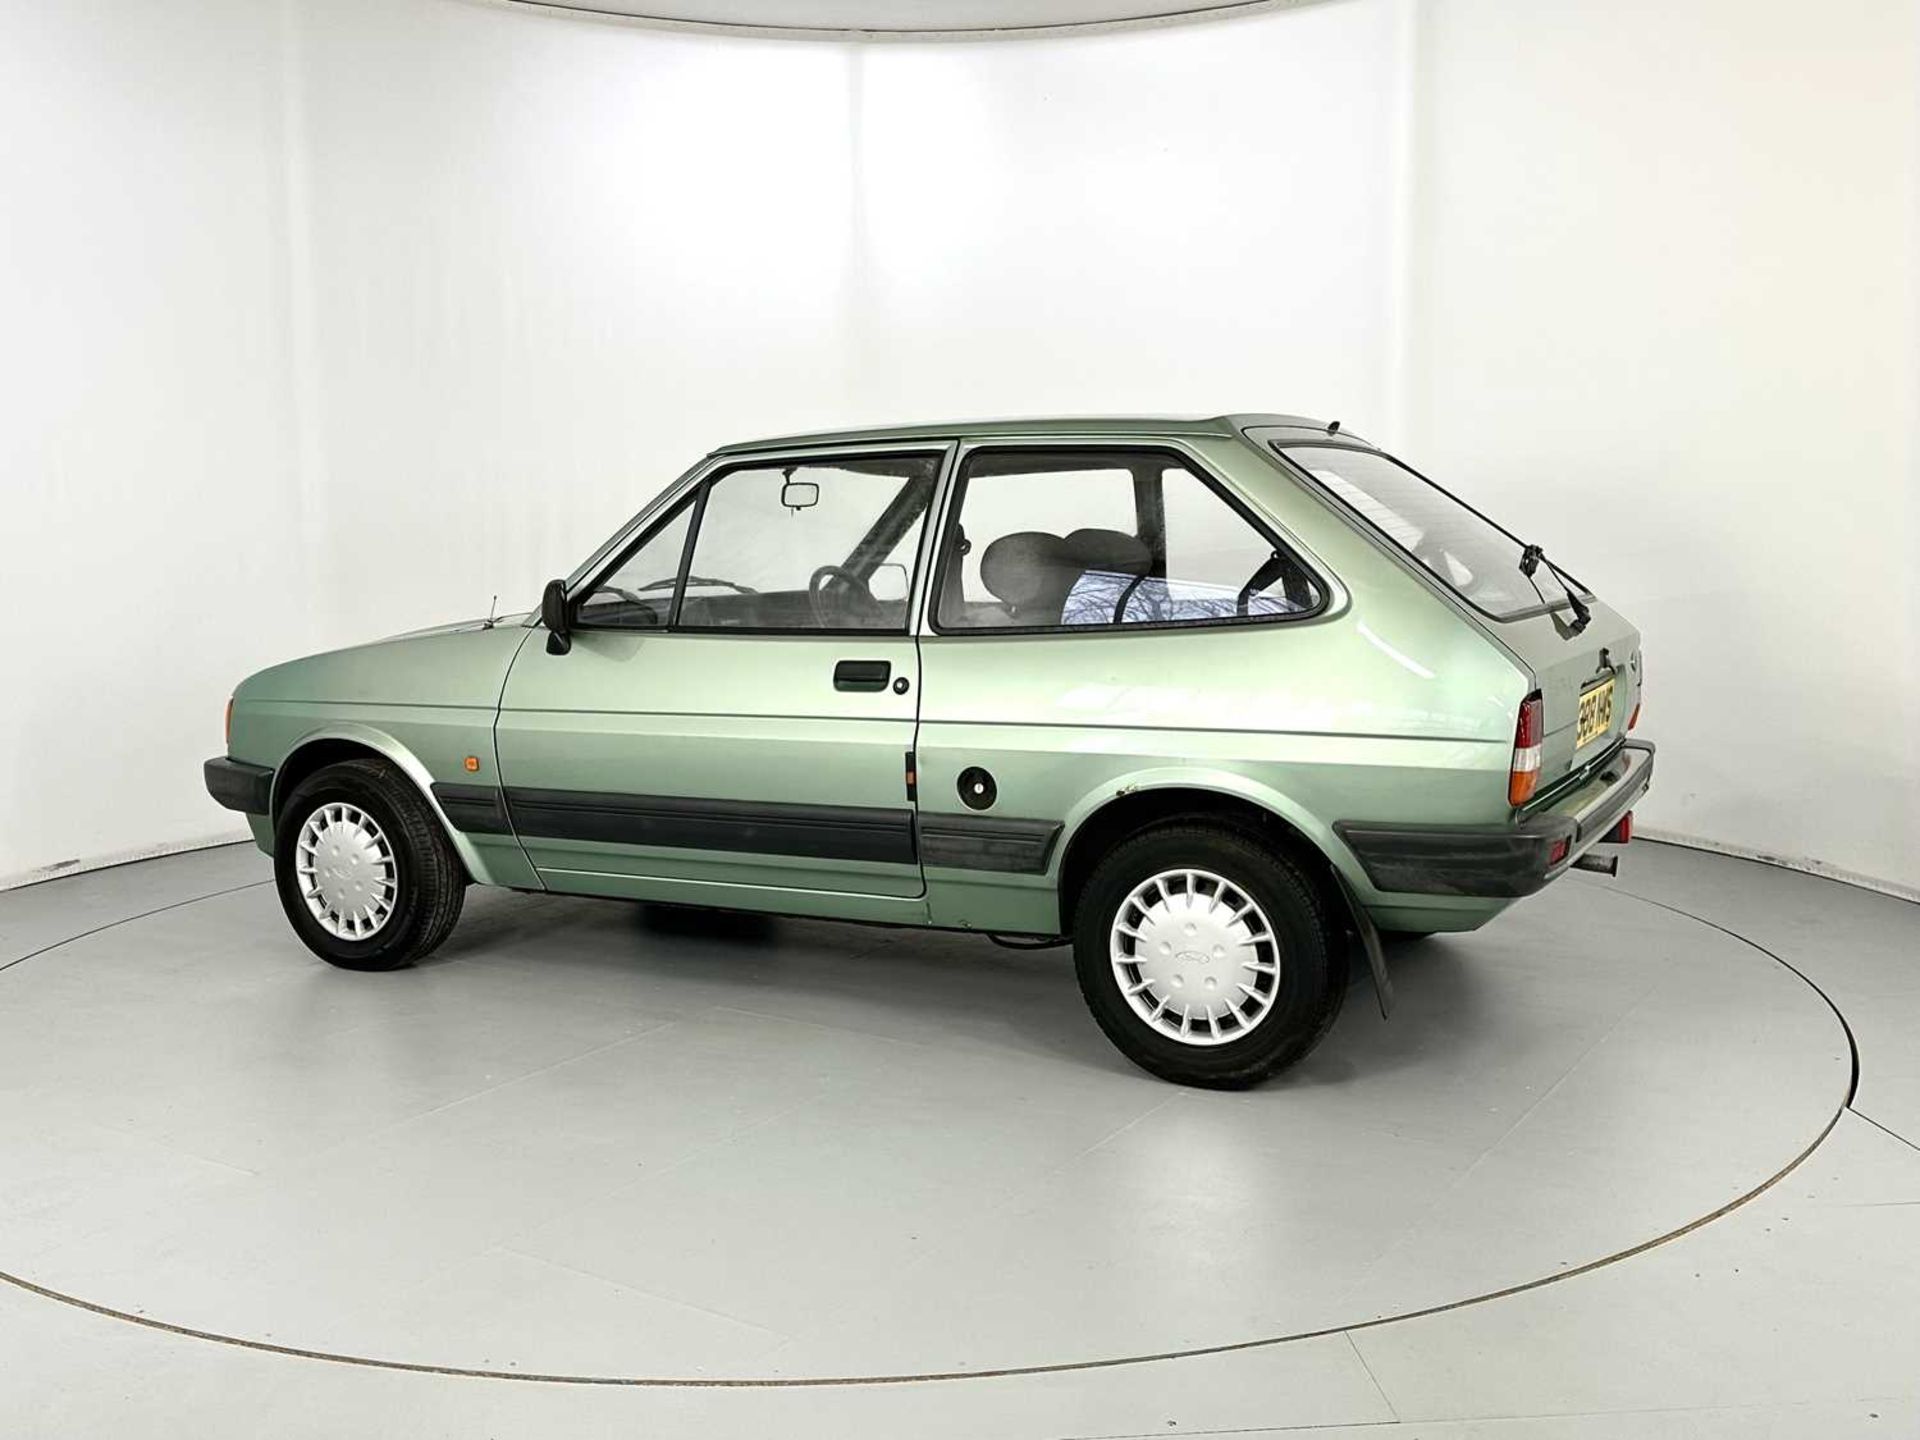 1988 Ford Fiesta - Image 6 of 30